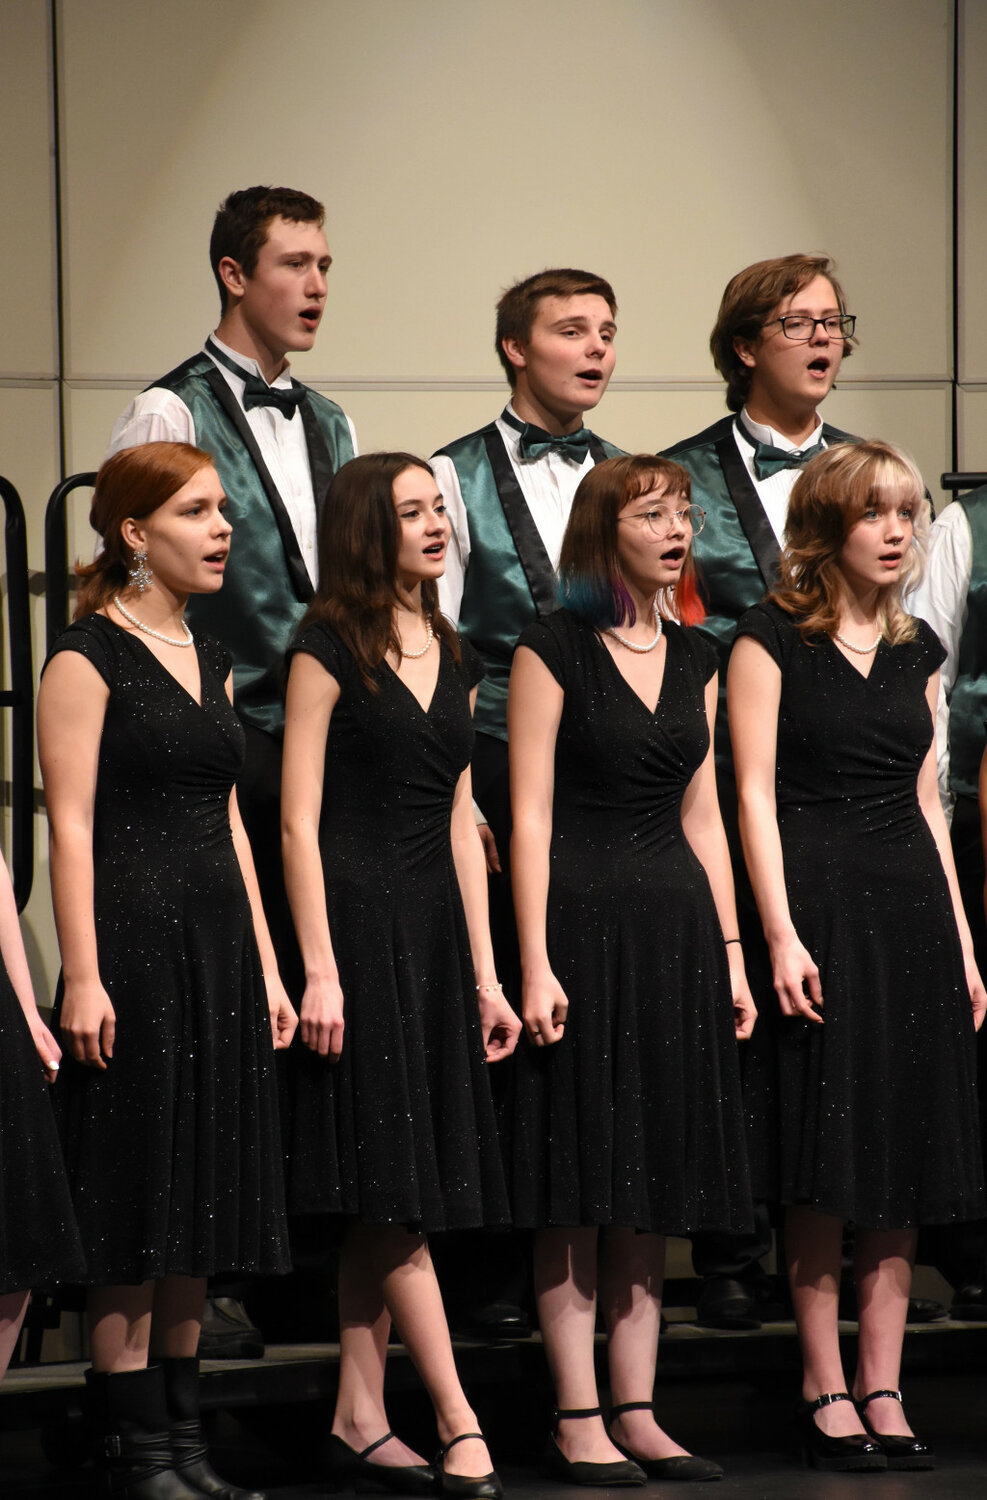 Robert Galbreath photos
The PHS Vocal Jazz ensemble performs ‘Jingle Bells.’ Pictured in front, from left, are Ayden Kaderavek, Camilla Scanlon, Kataniya Stevens and Emery Harmon. Pictured in back, from left, are Ellis Kuhn, Tucker Kelly and Travis Donaldson.